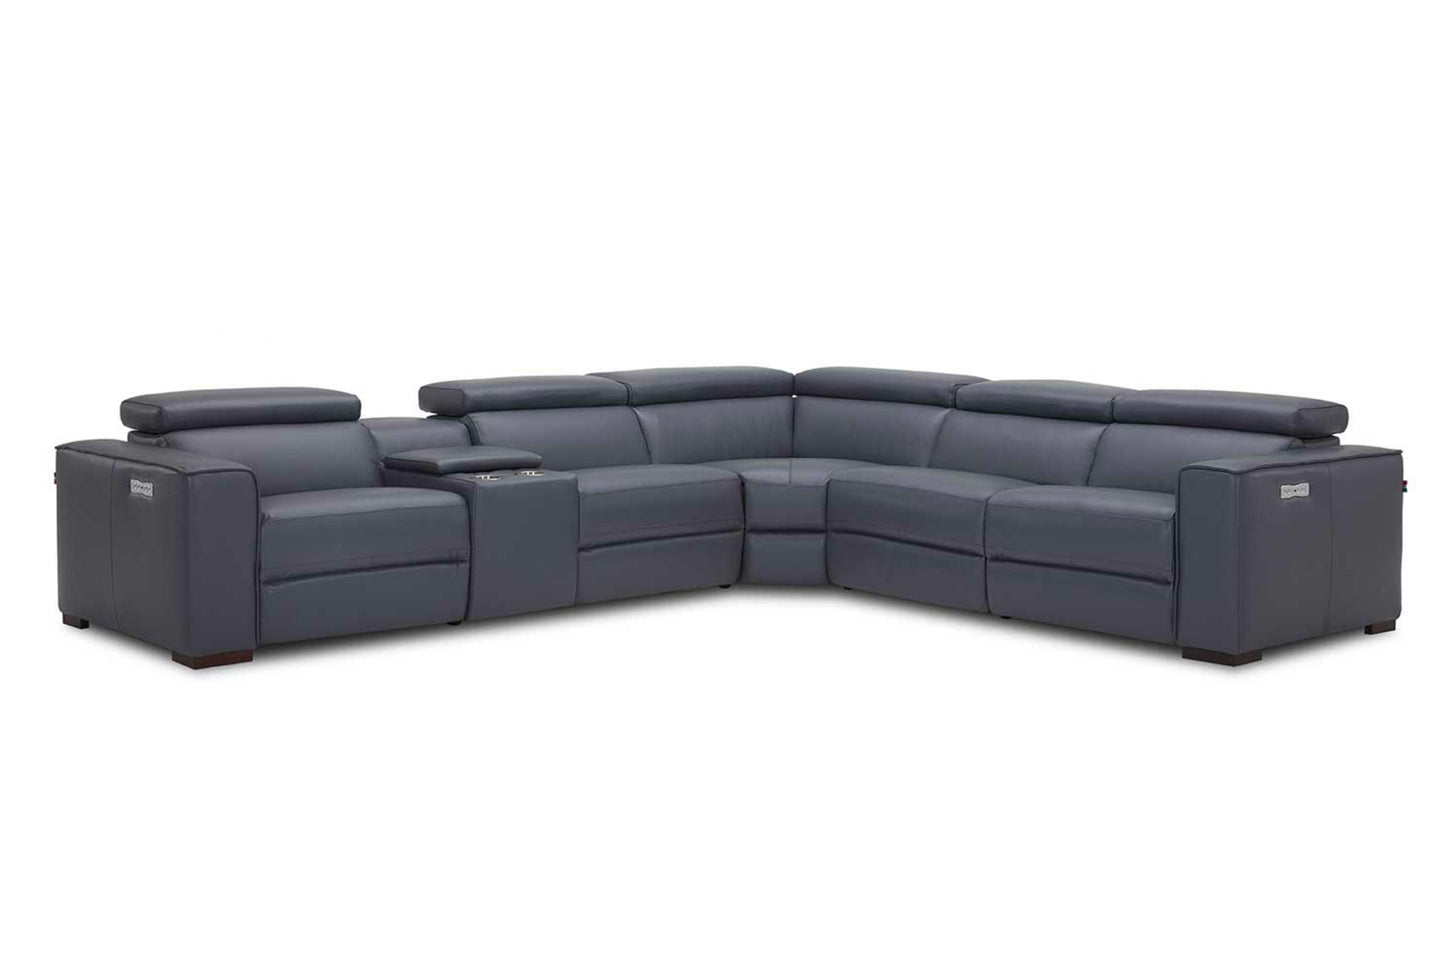 Picasso 6Pc Motion Sectional In Dark Grey - Venini Furniture 